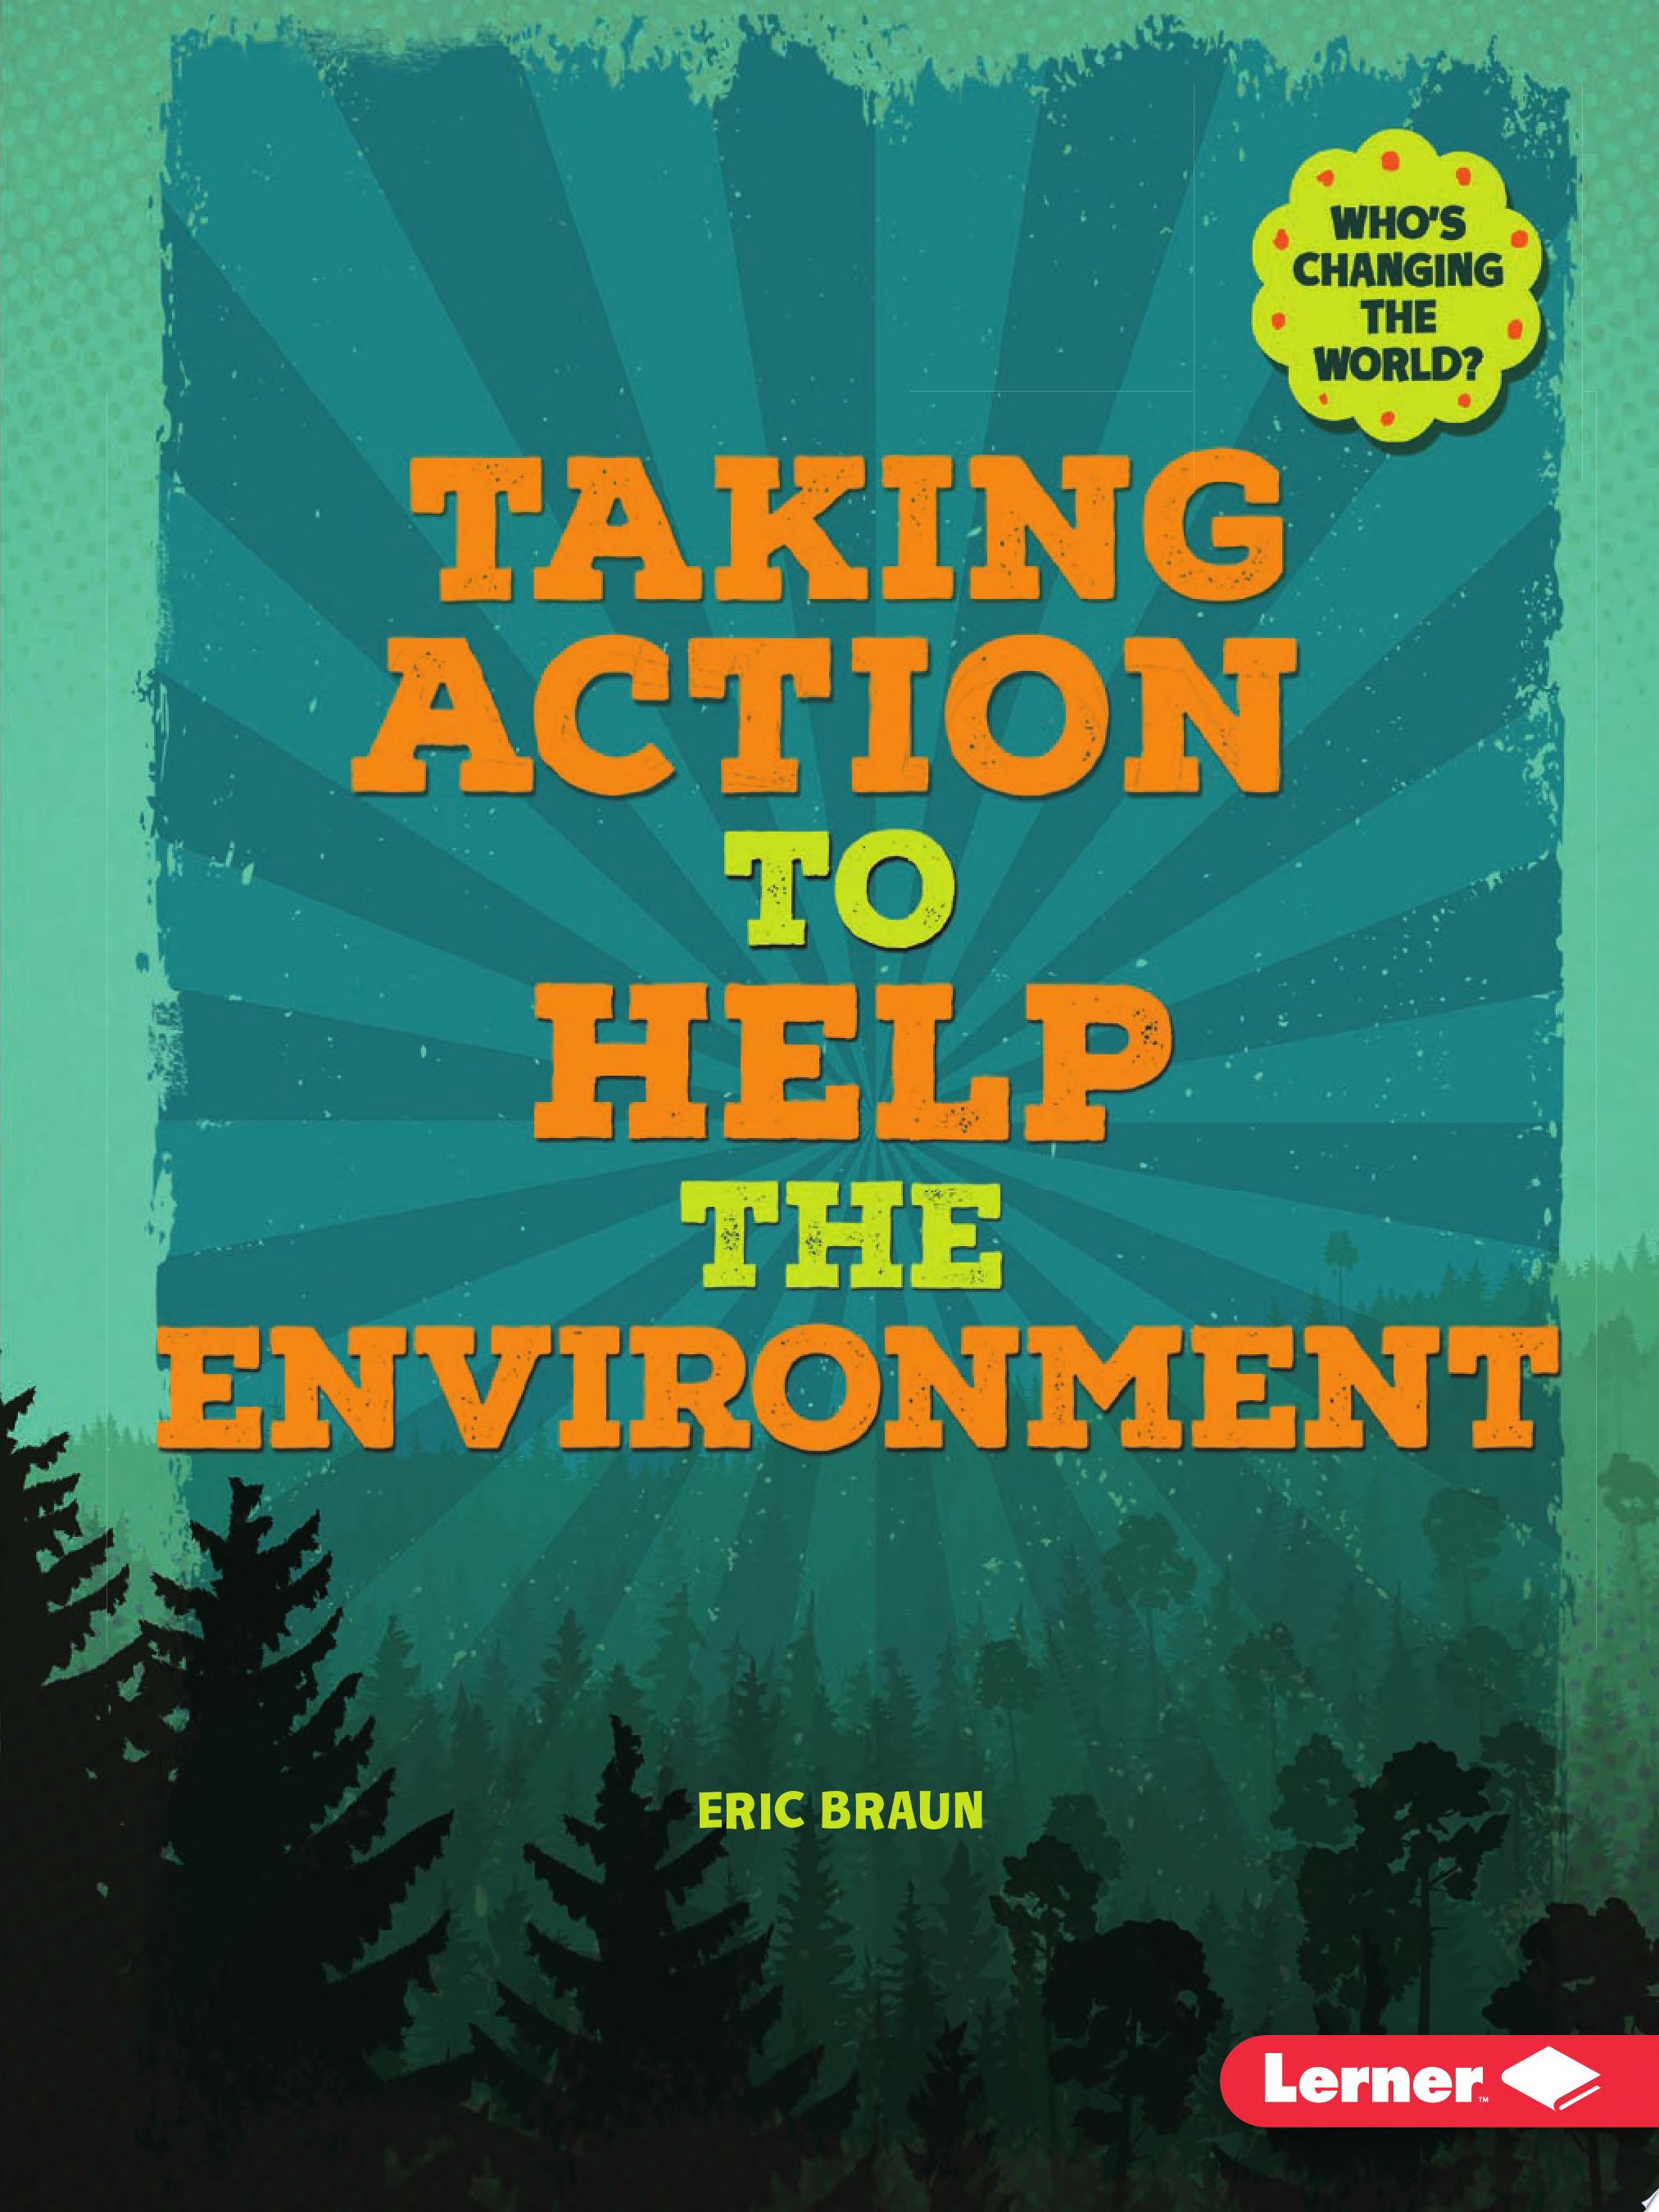 Image for "Taking Action to Help the Environment"